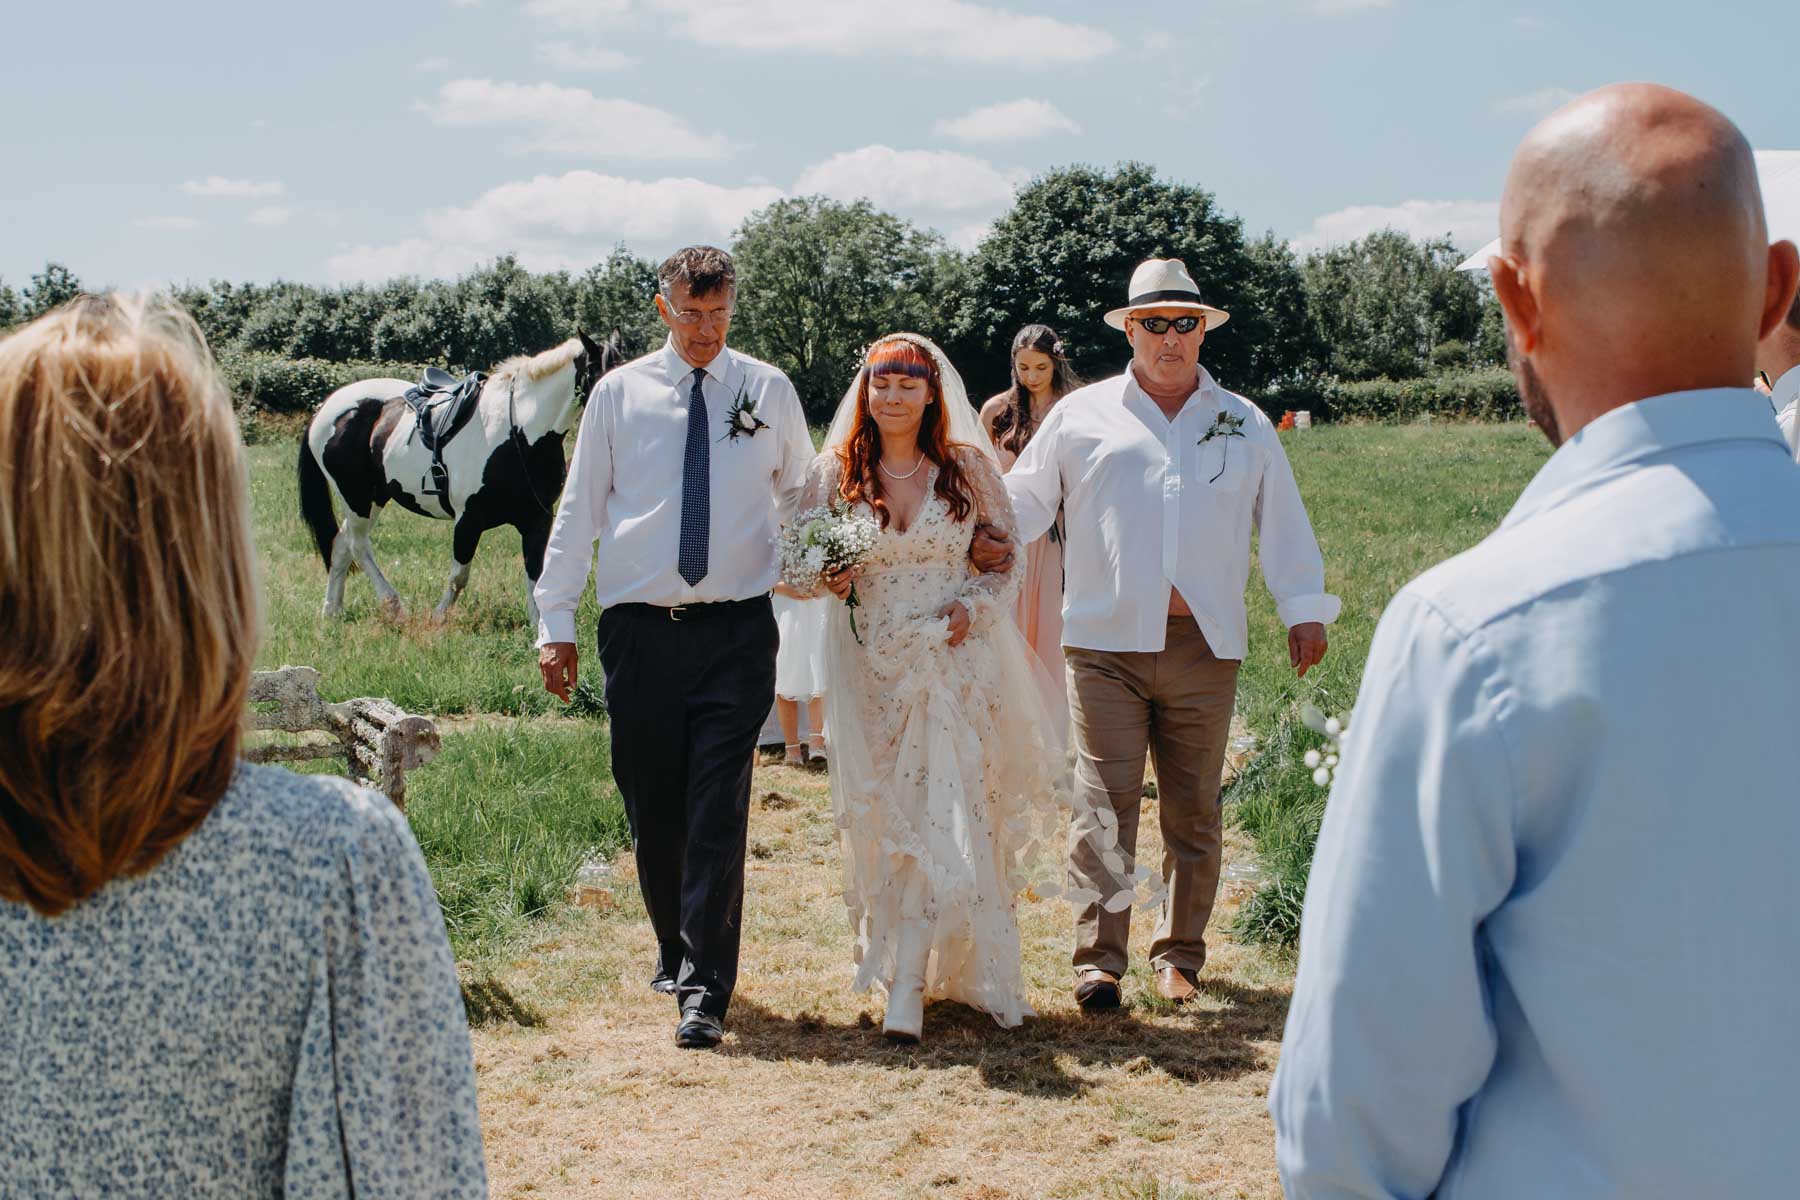 The bride walks down to the handfasting ceremony with her father and stepfather